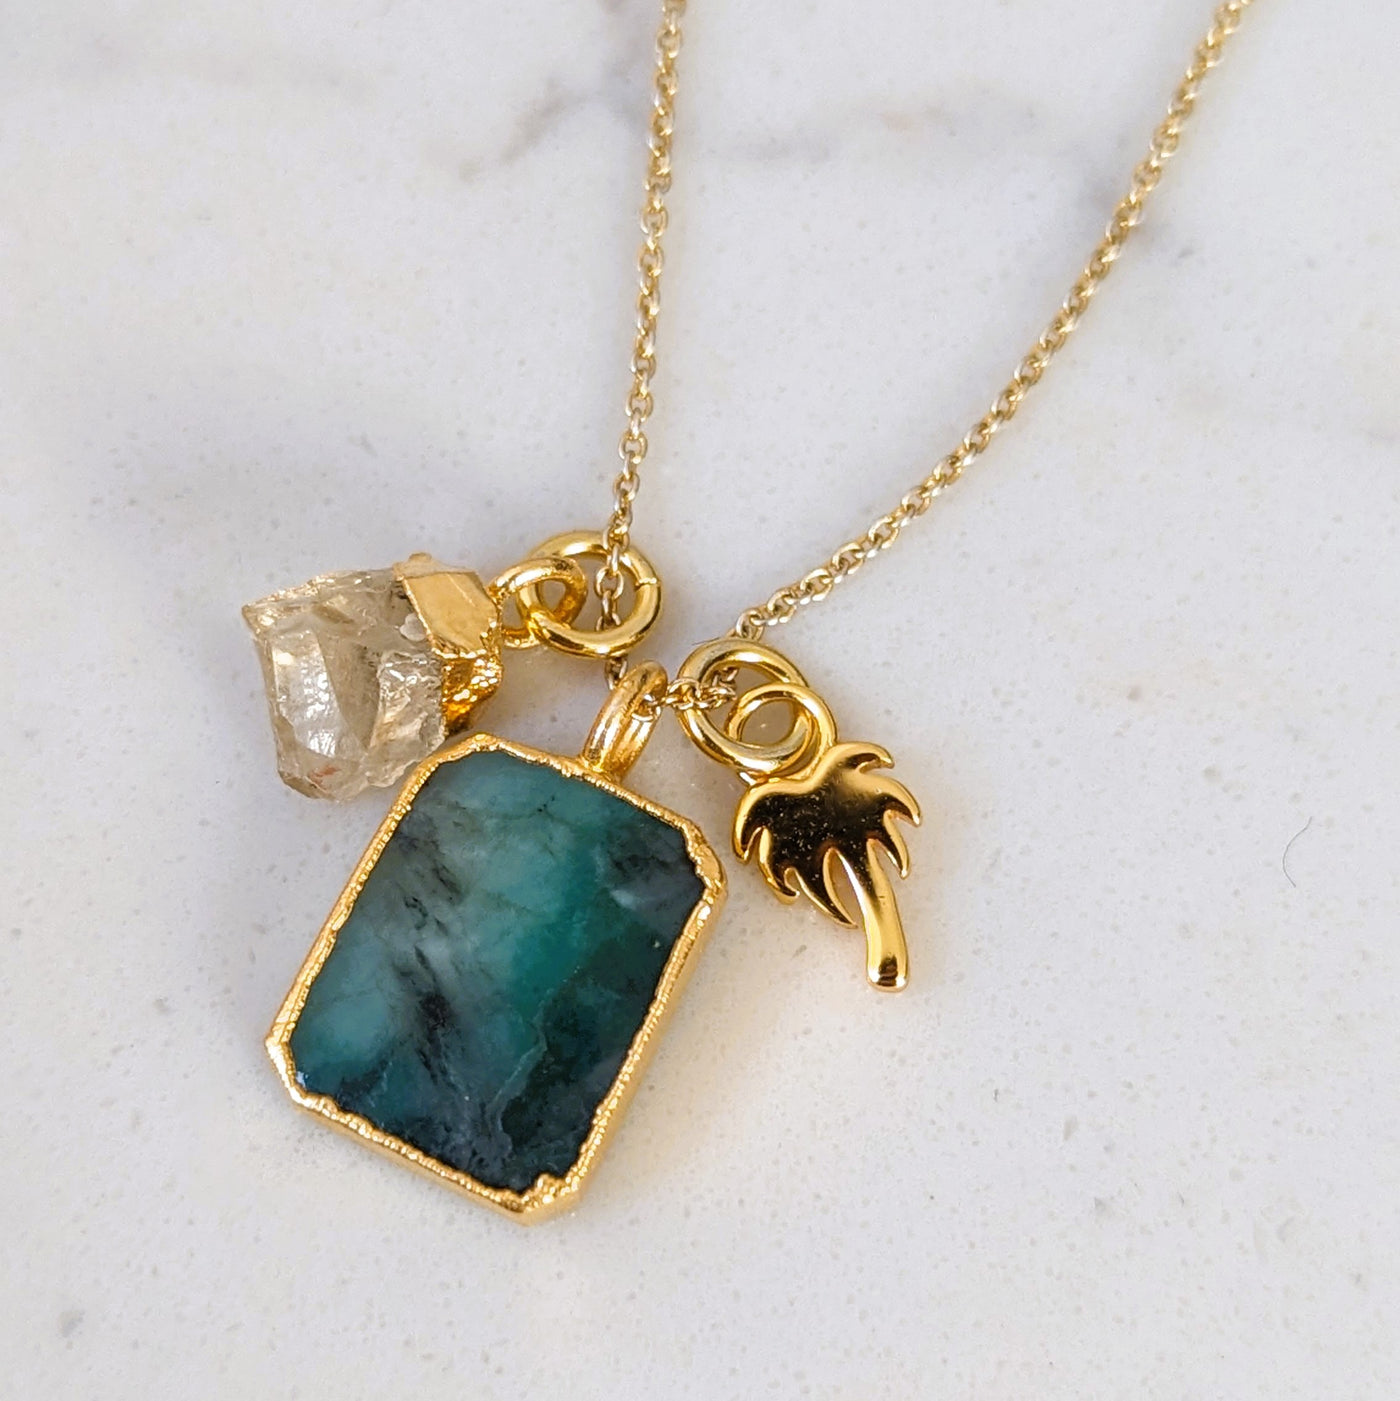 The Trio Emerald, Citrine and Charm Gemstone Necklace - 18CT Gold Plated